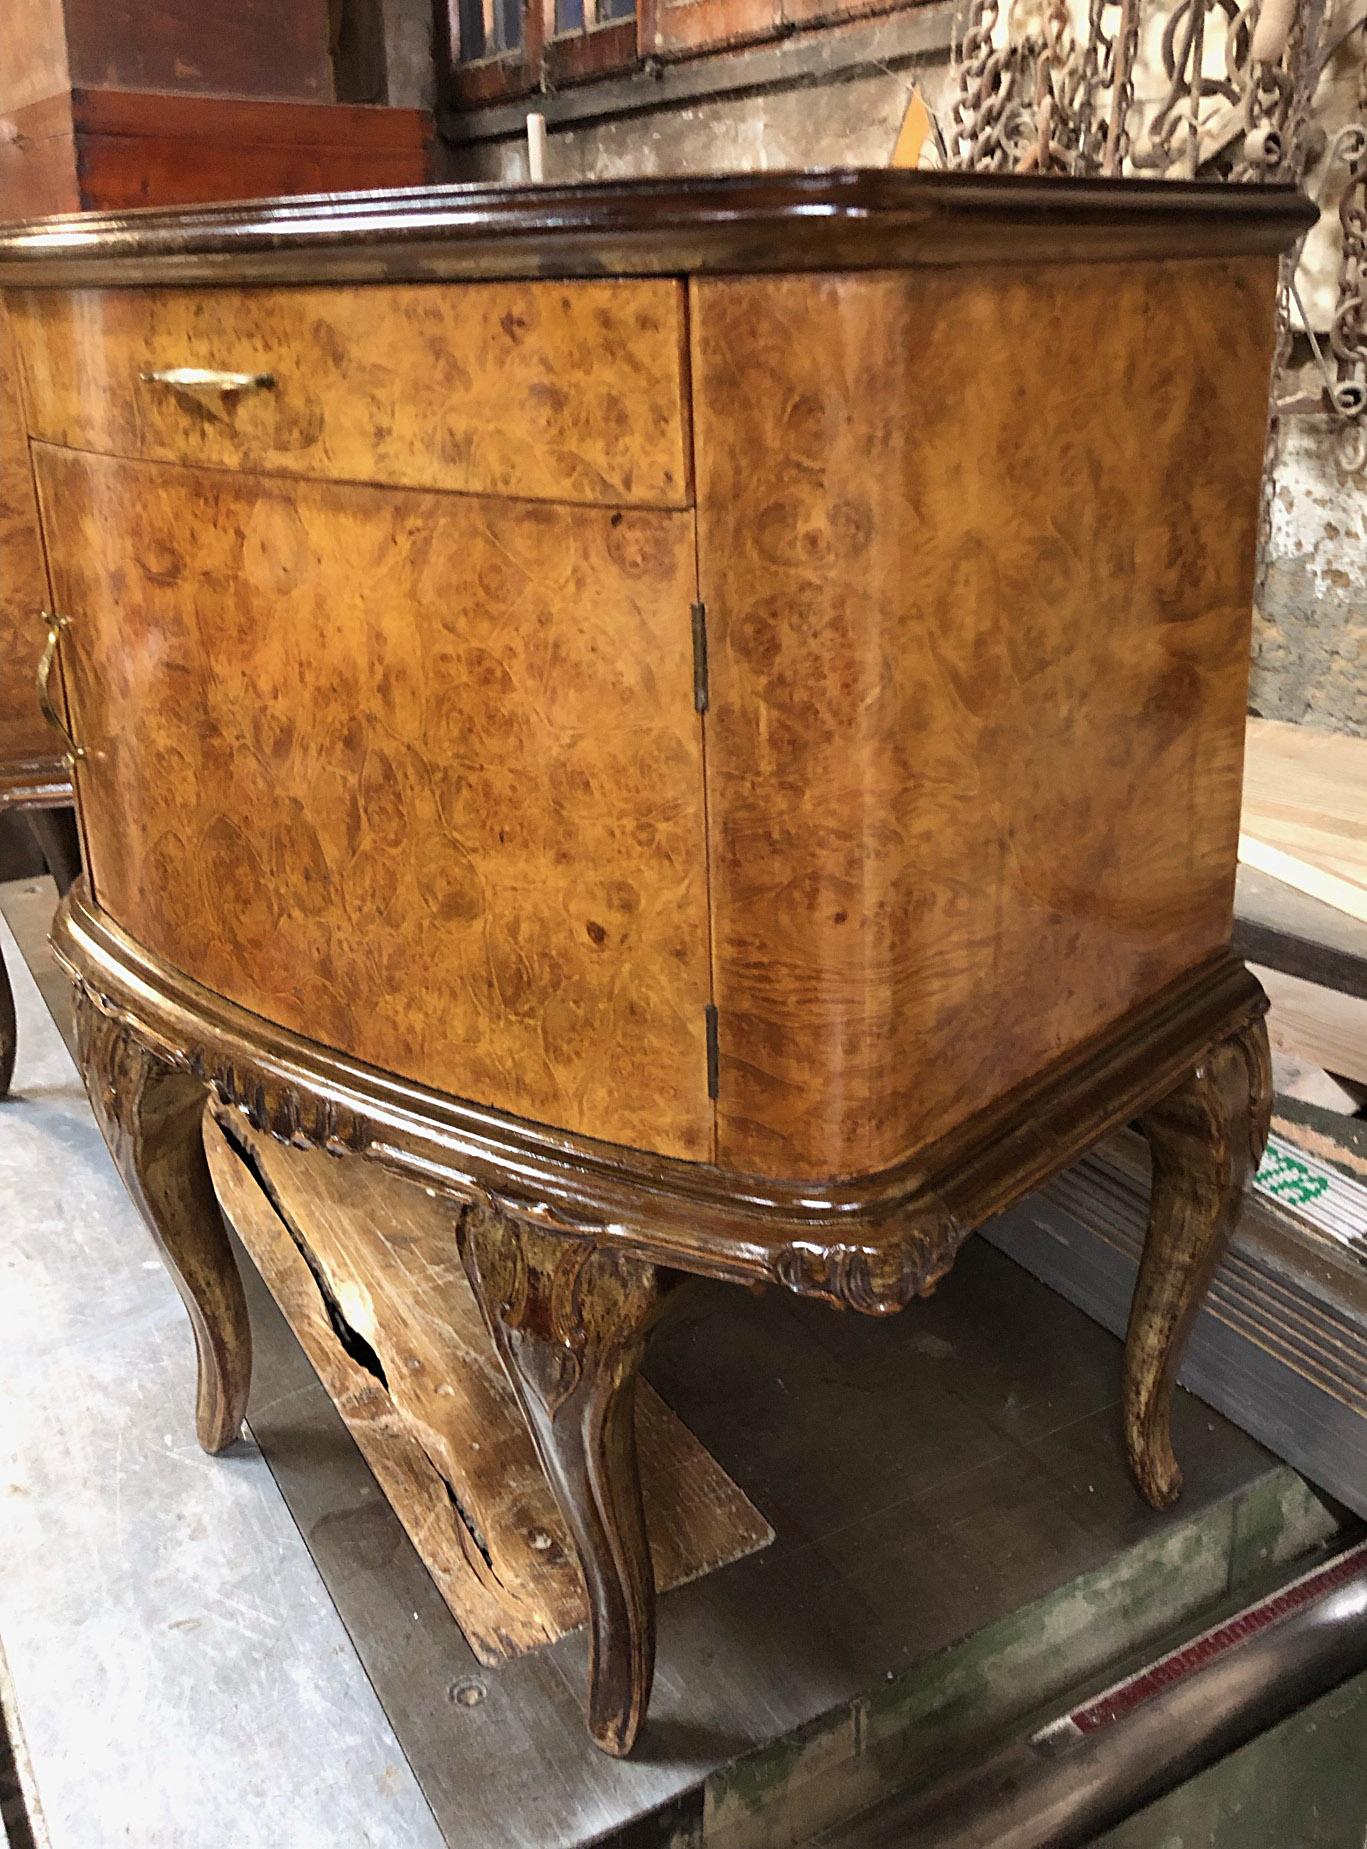 Pair of Italian night stands dating back to the mid-1900s. 
The coloring is original in patinain and wood maple burl with pink glass top.
Original color and handles.
They have a drawer at the top and snap-lock doors.
Comes from an old elegant